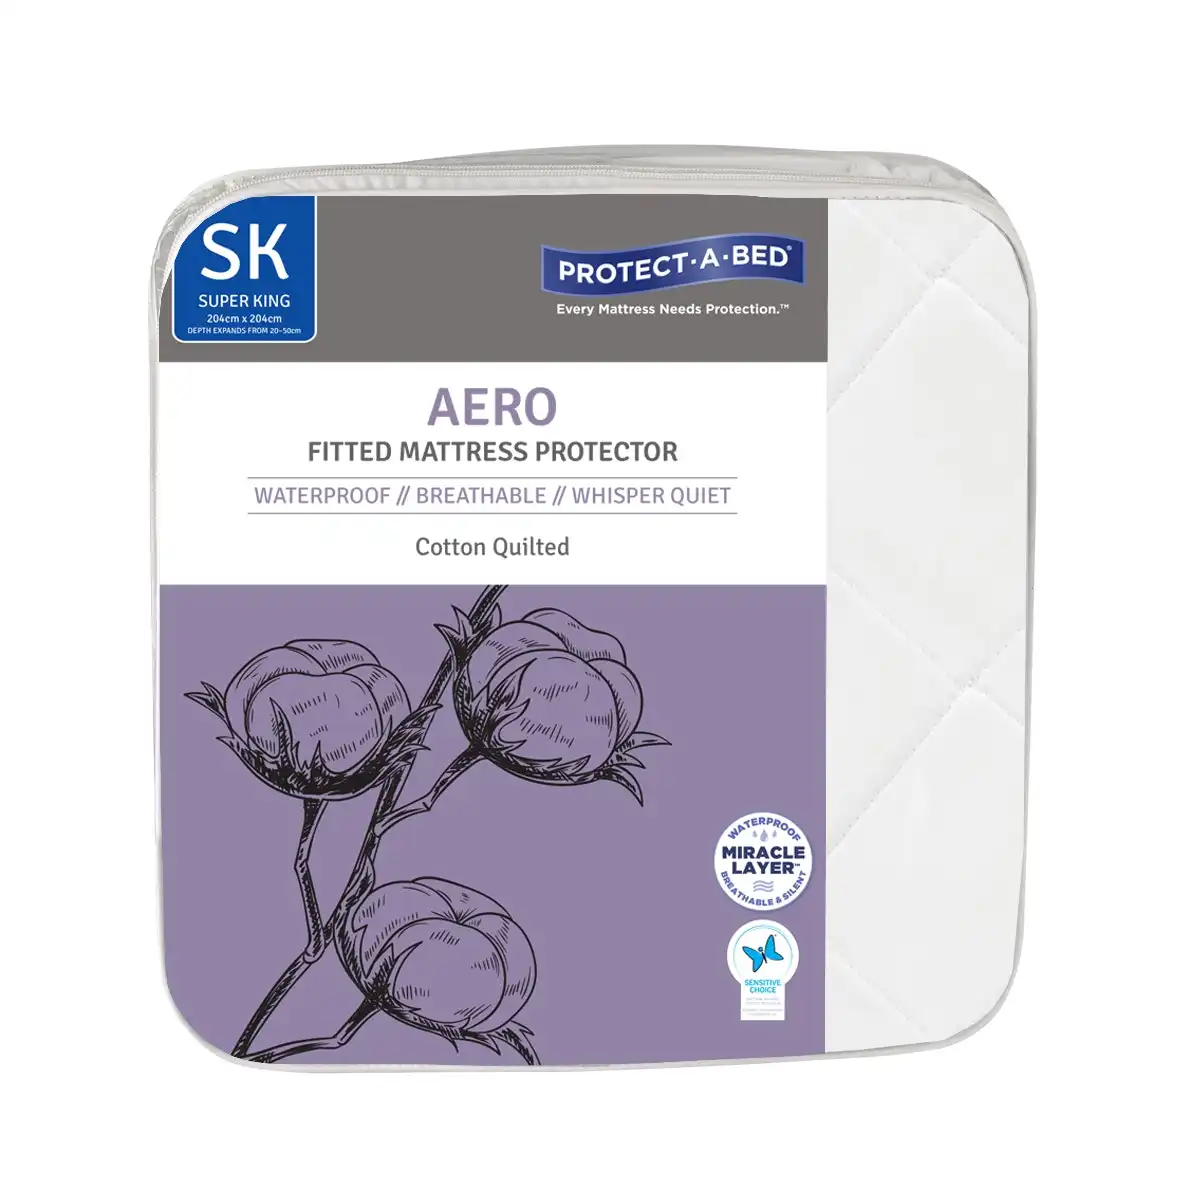 Protect A Bed Aero Cotton Quilted Fitted Waterproof Mattress & Pillow Protectors ON SALE